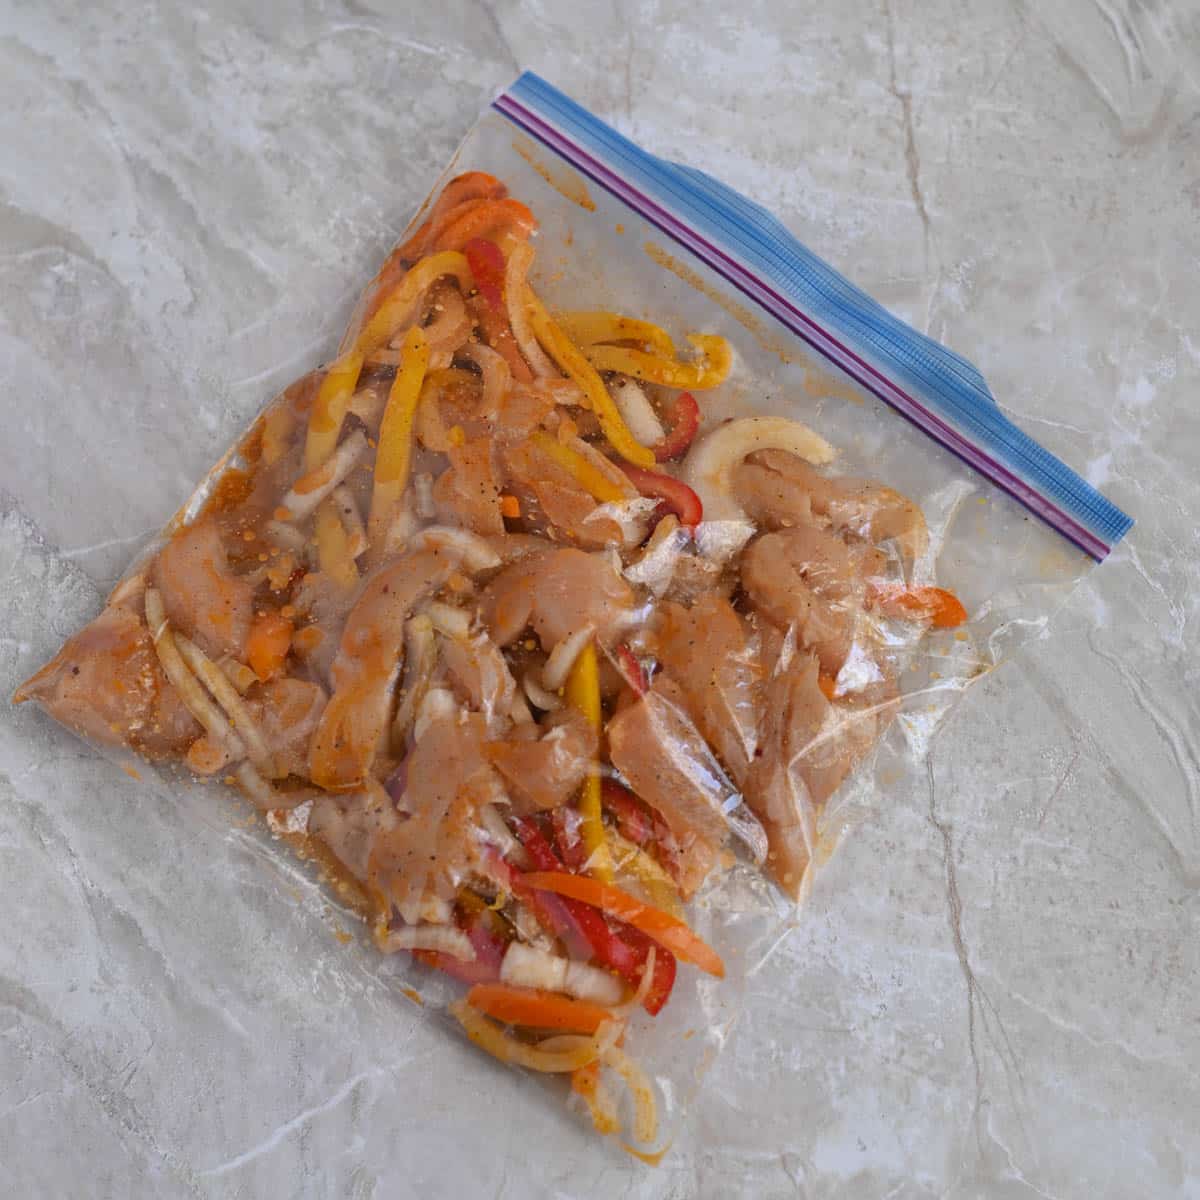 Chicken and sliced vegetables marinated in sauce inside a sealed plastic bag, placed on a textured surface.